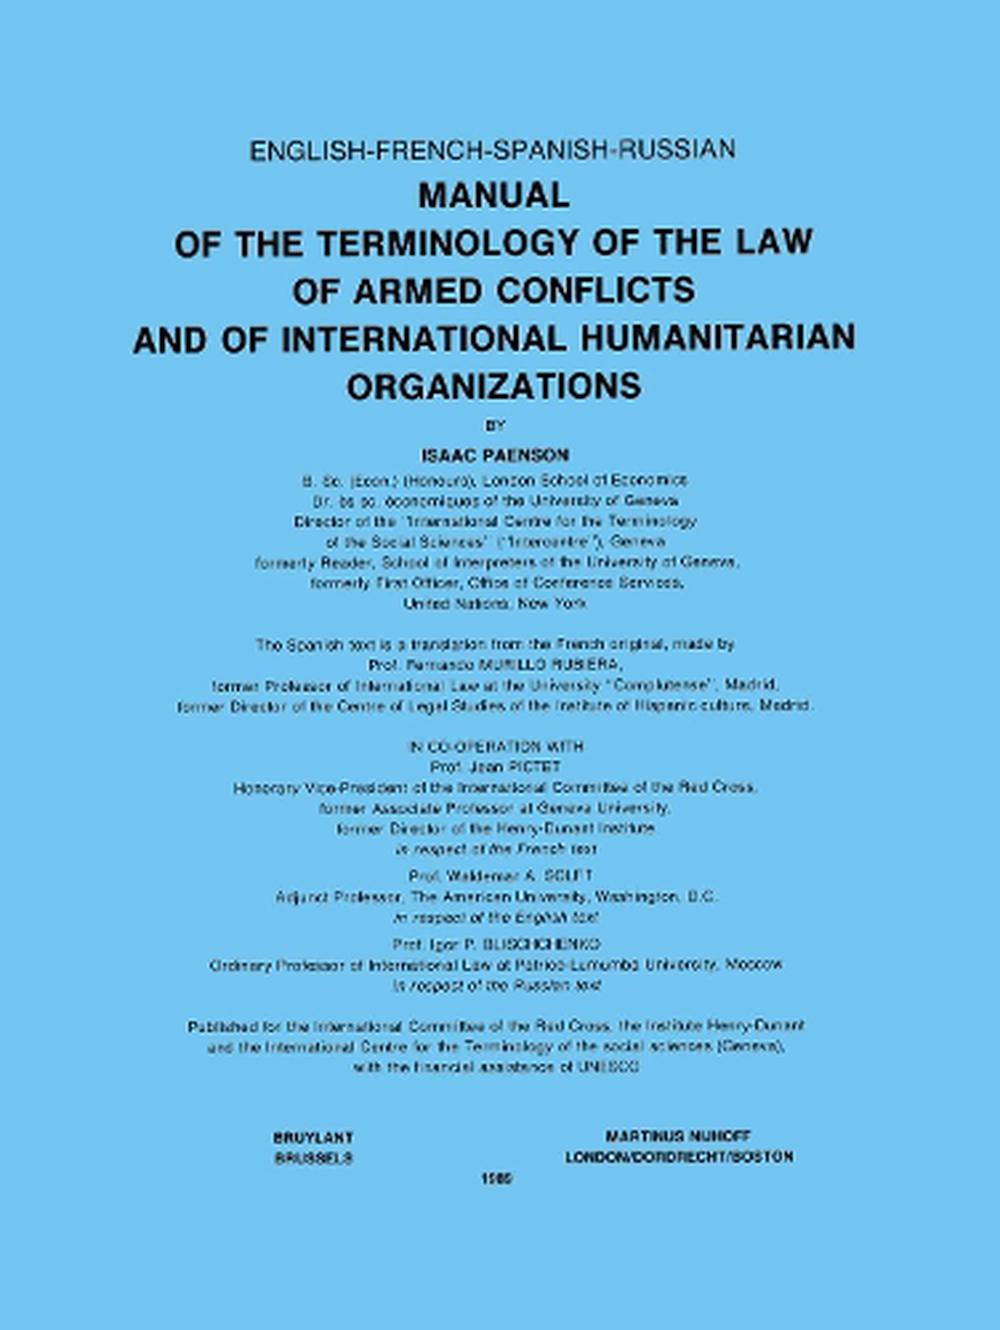 types of armed conflict in international humanitarian law